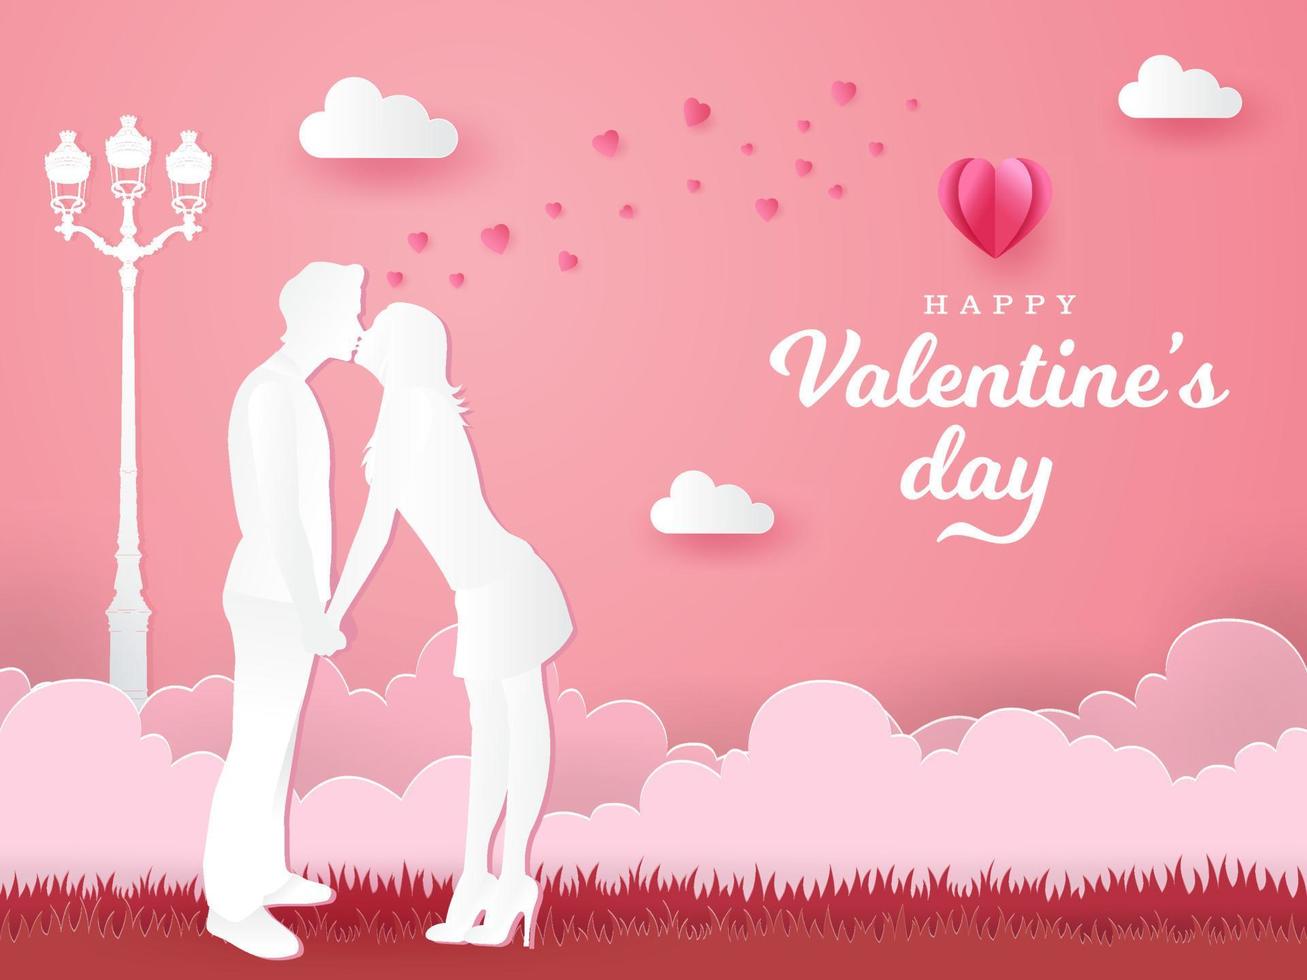 Valentine's Day greeting card. romantic couple kissing and holding hands on pink background vector